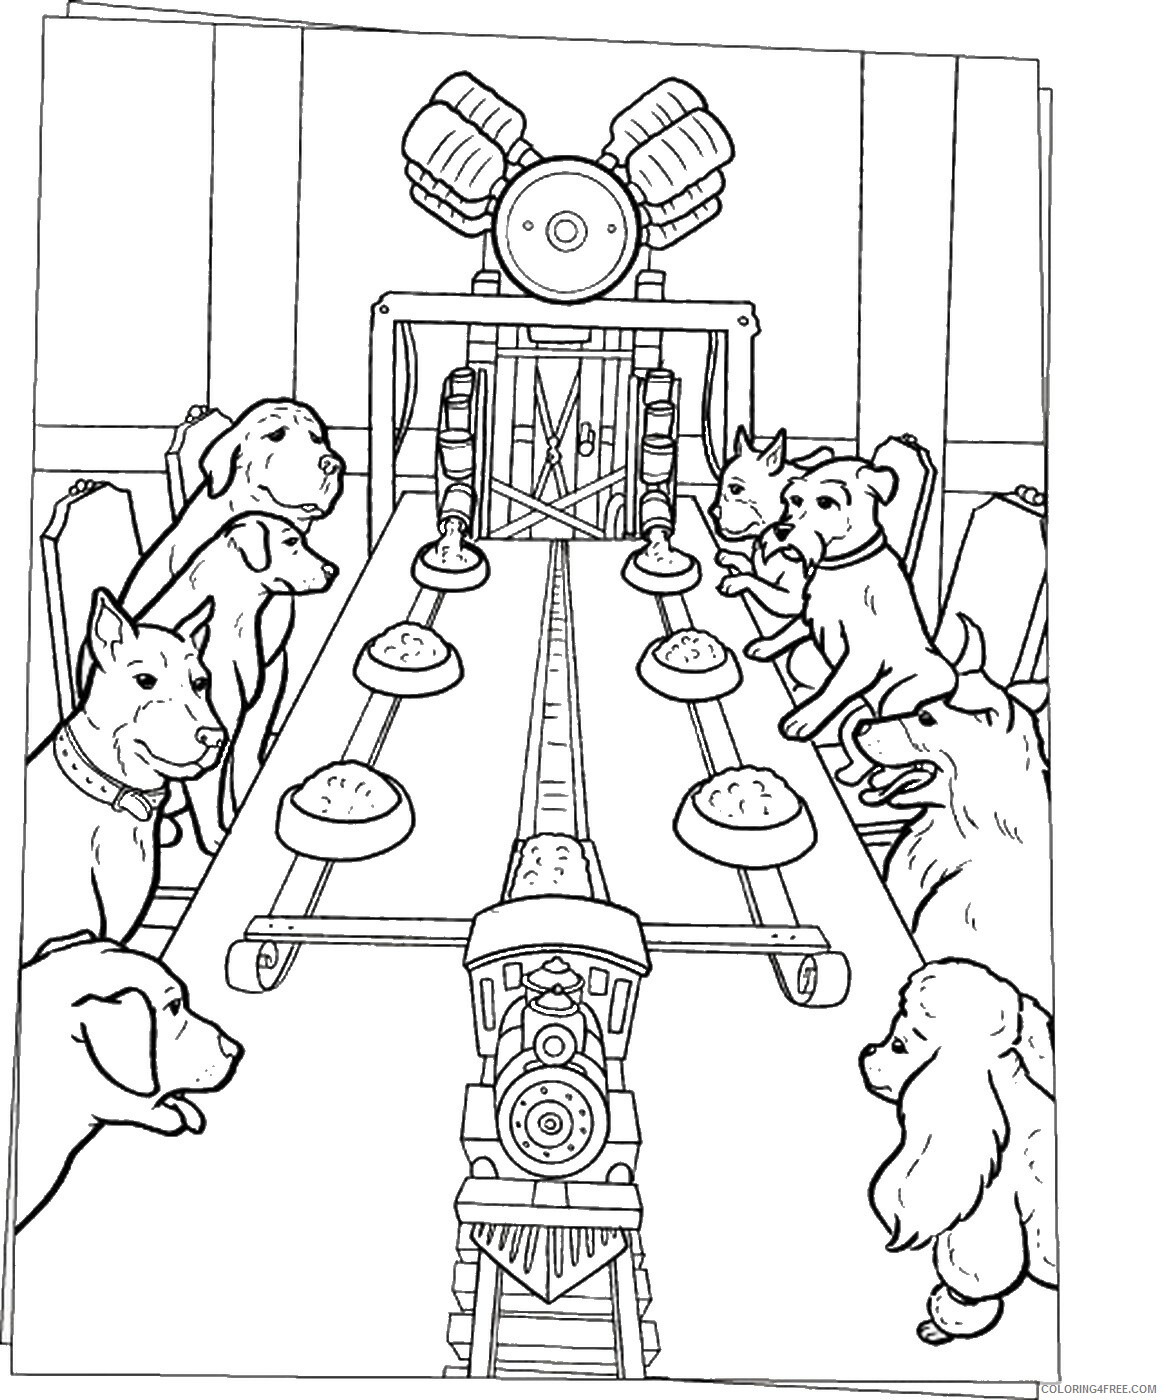 Hotel for Dogs Coloring Pages TV Film hotel_for_dogs_cl02 Printable 2020 03774 Coloring4free